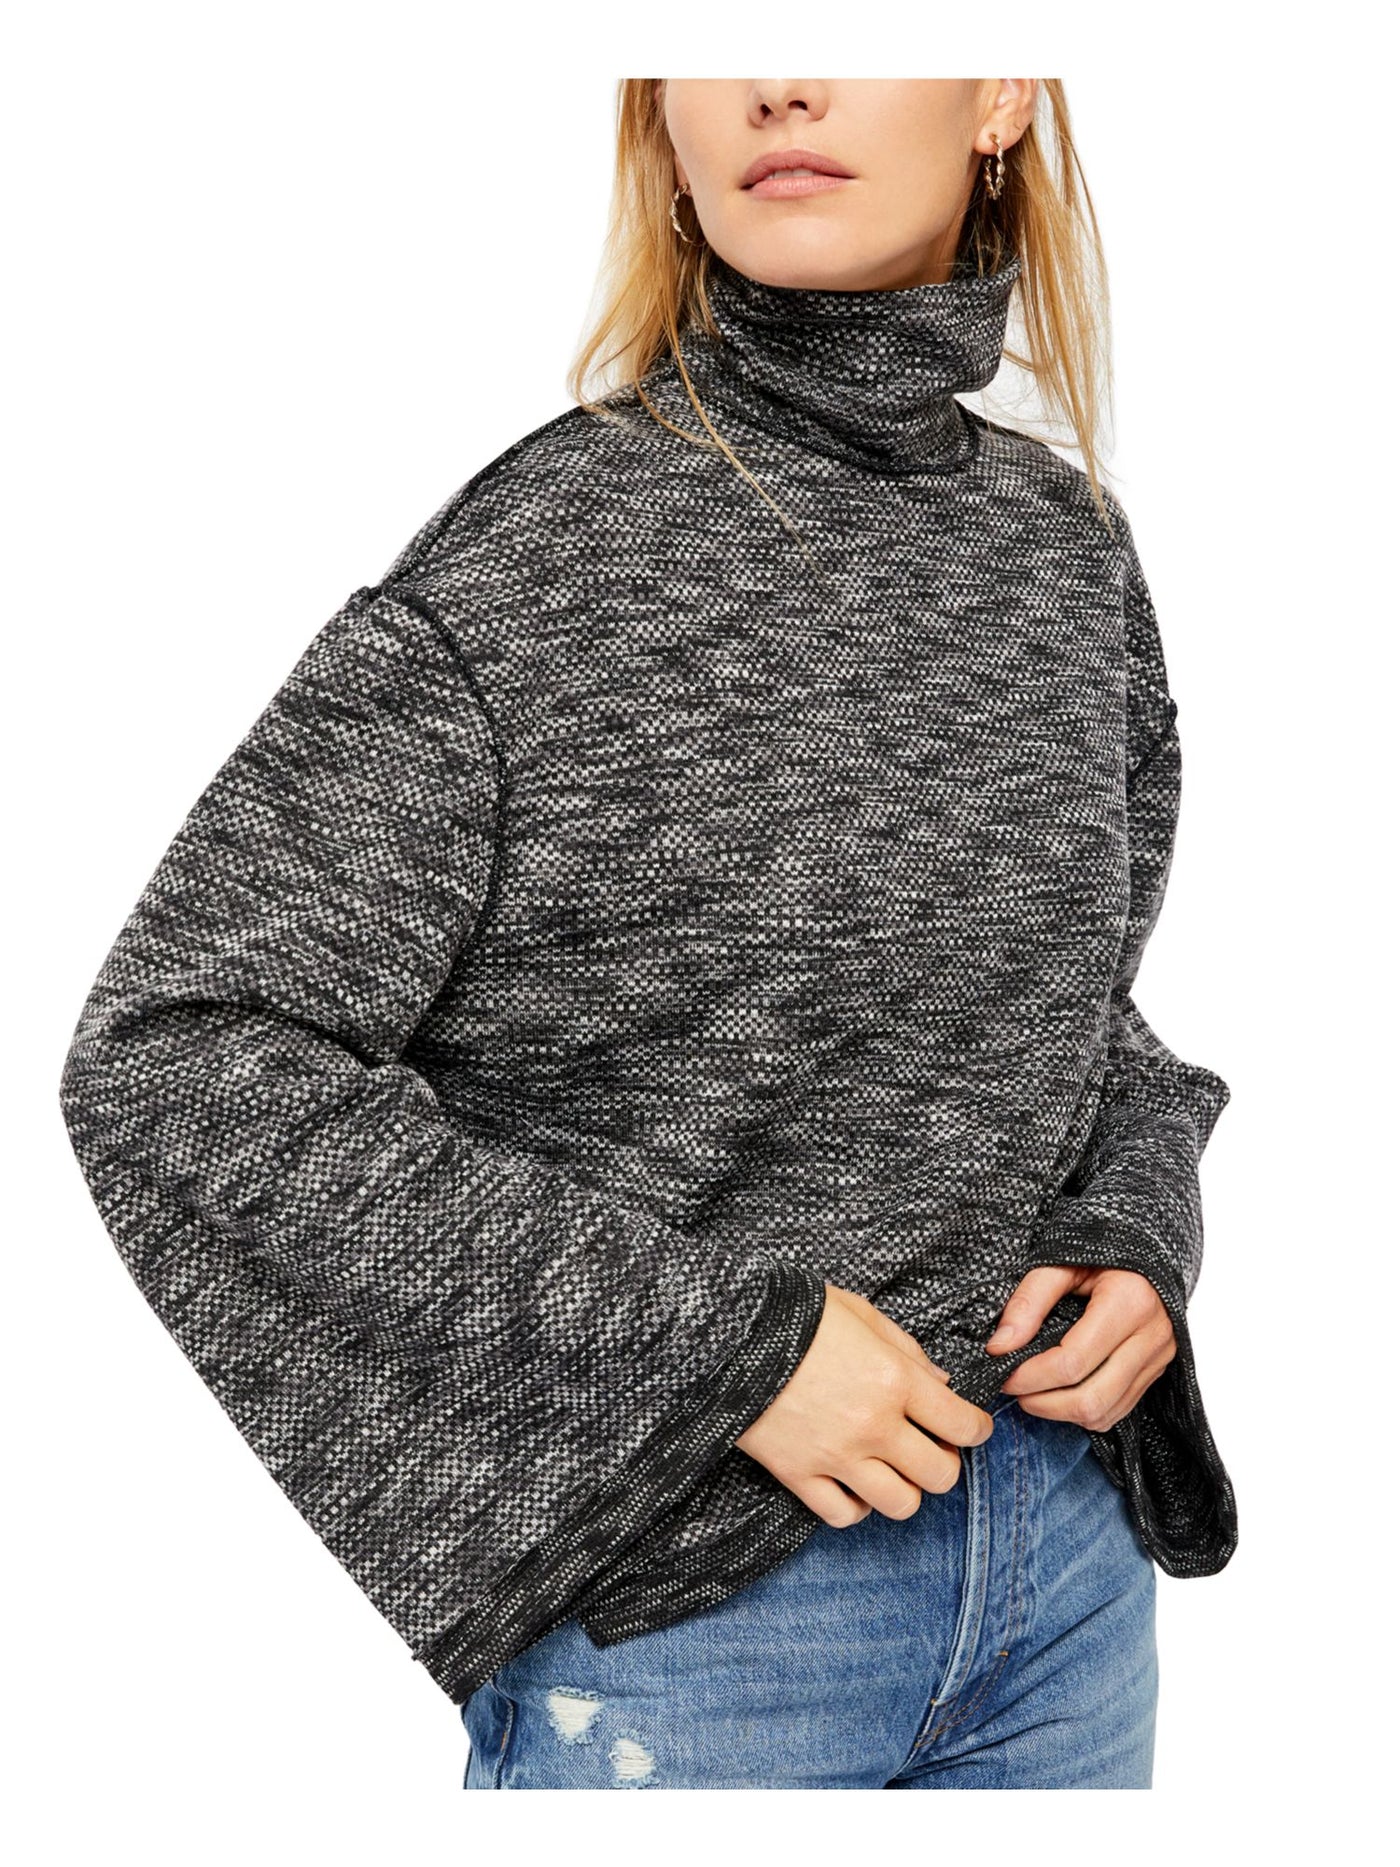 WE THE FREE Womens Black Houndstooth Bell Sleeve Cowl Neck Sweater XS